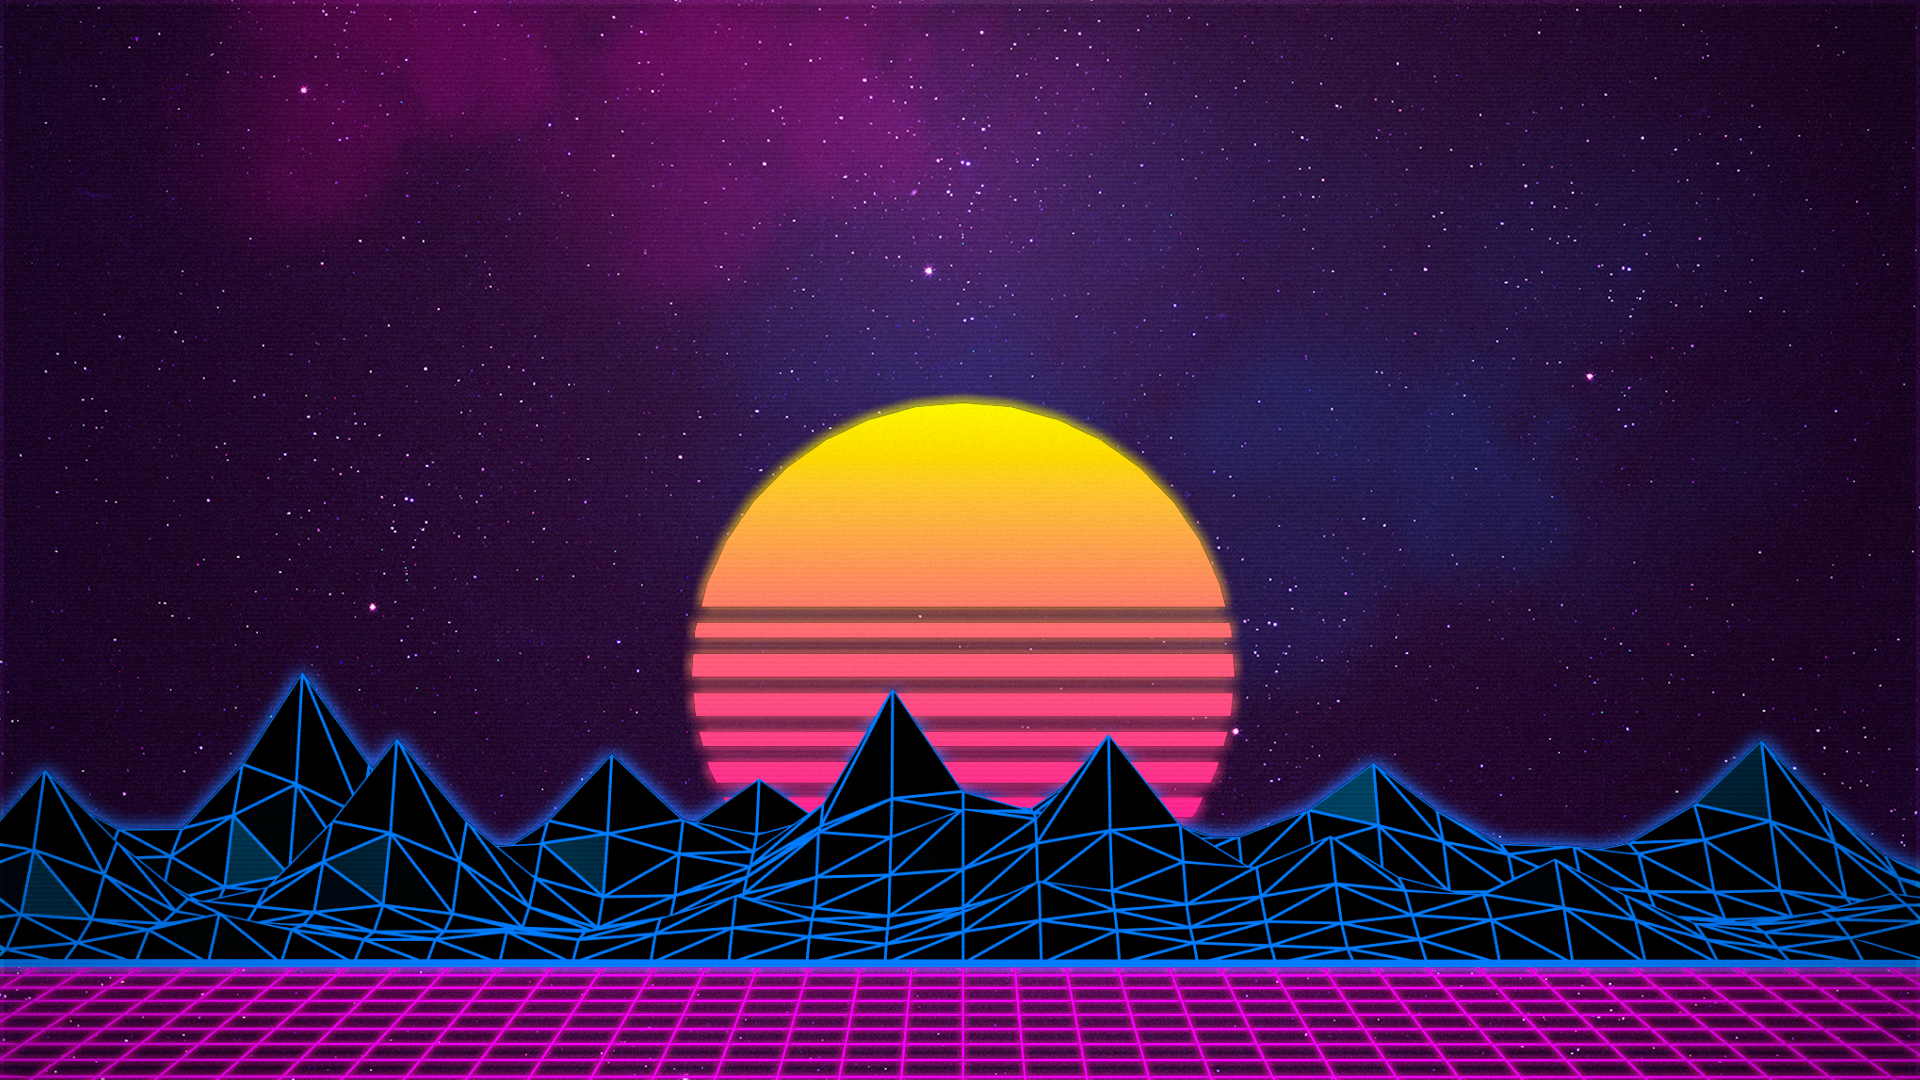 Synthwave/Retrowave - Neon 80s - Background